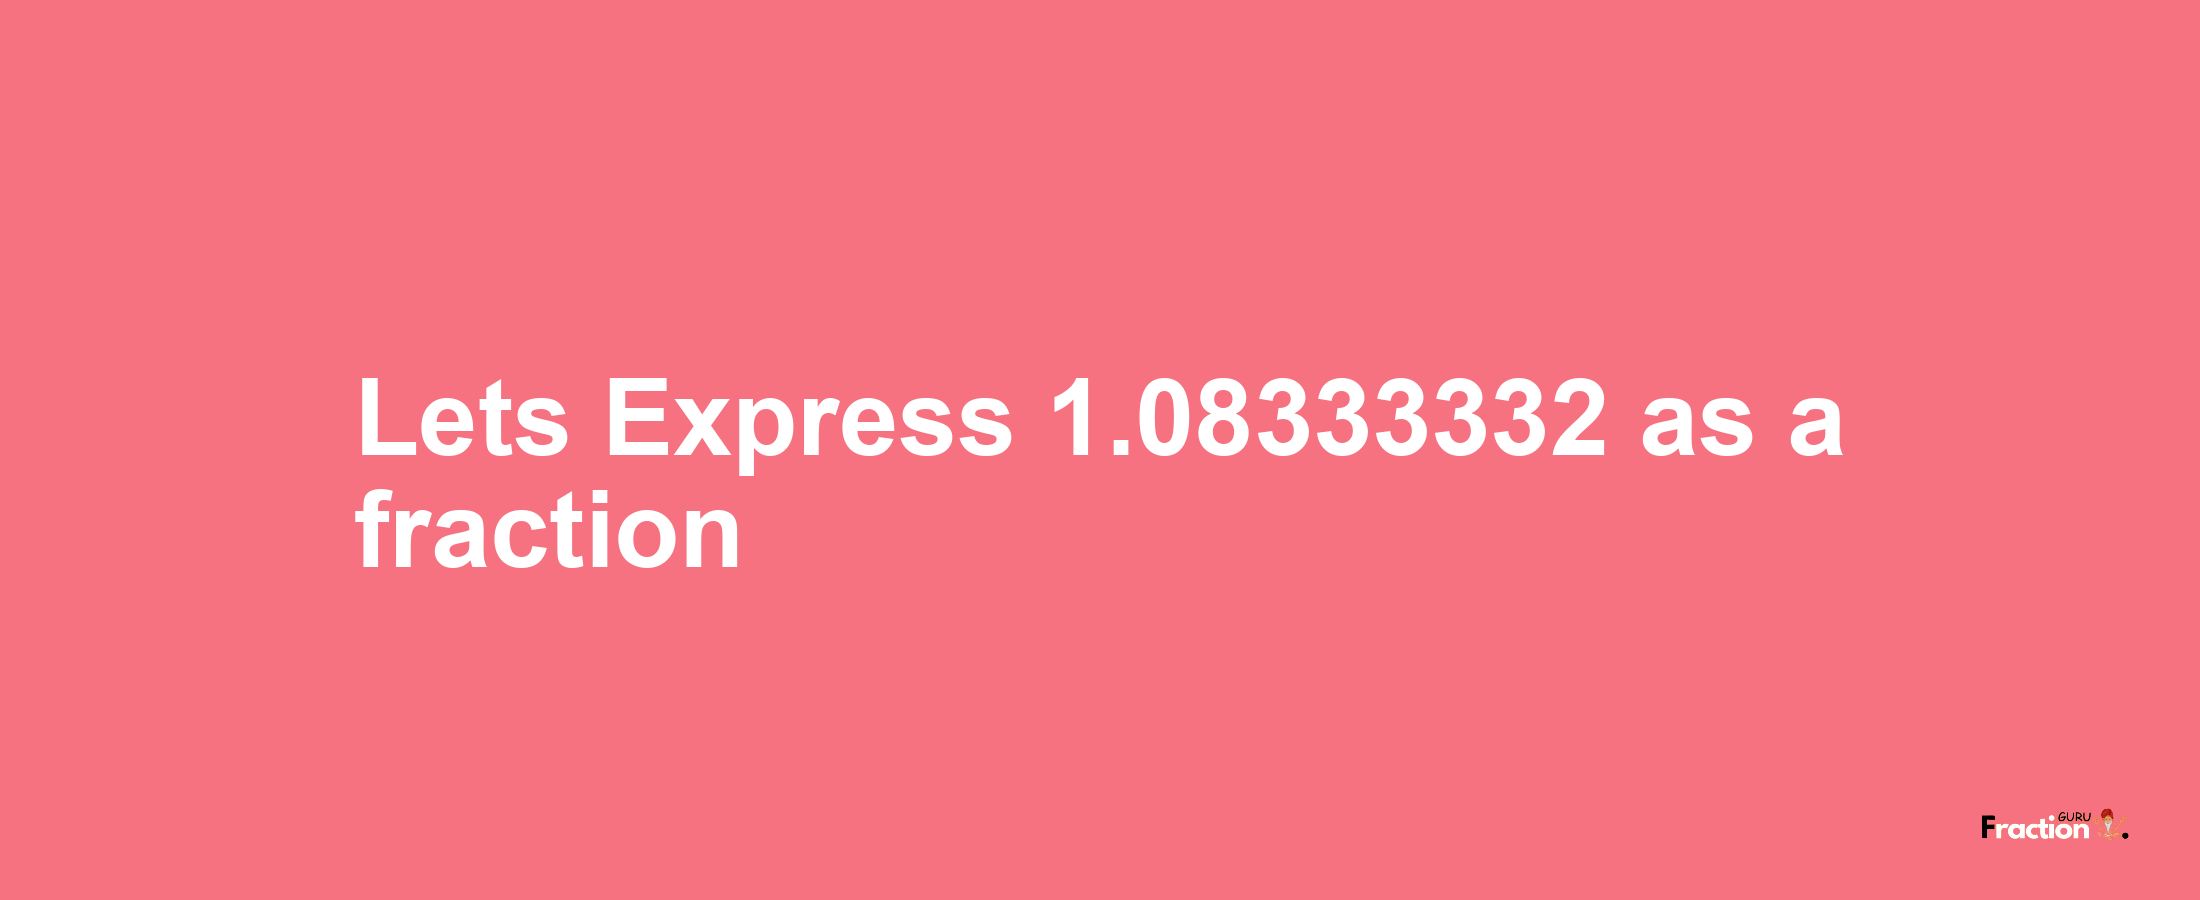 Lets Express 1.08333332 as afraction